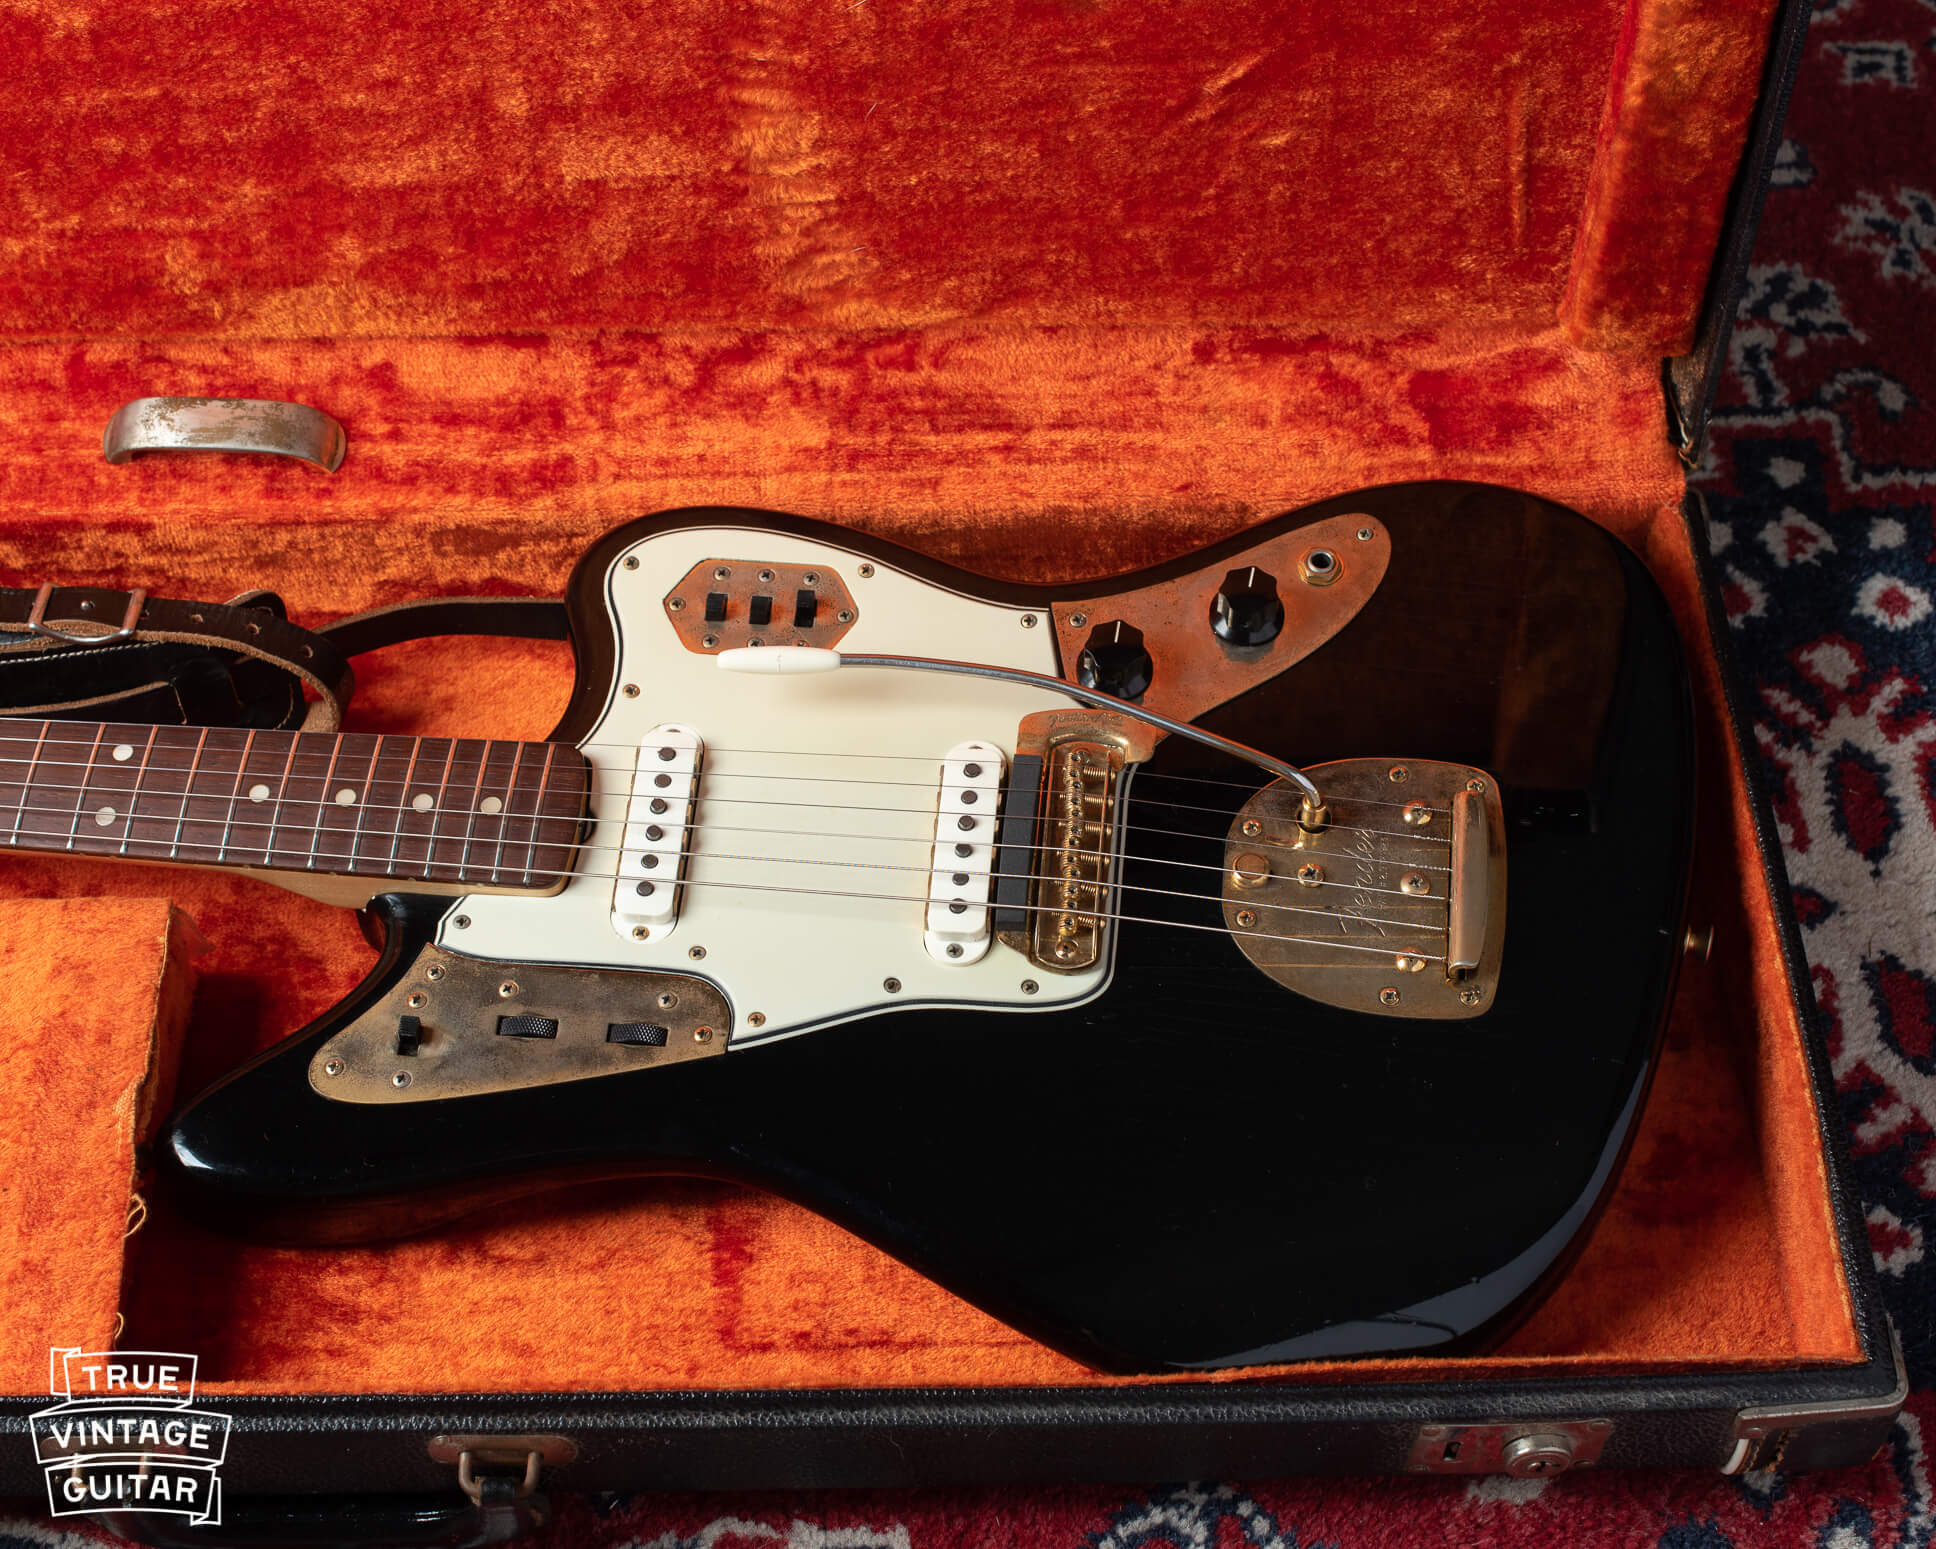 Fender Jaguar 1965 in custom color Black finish with matching headstock and gold hardware